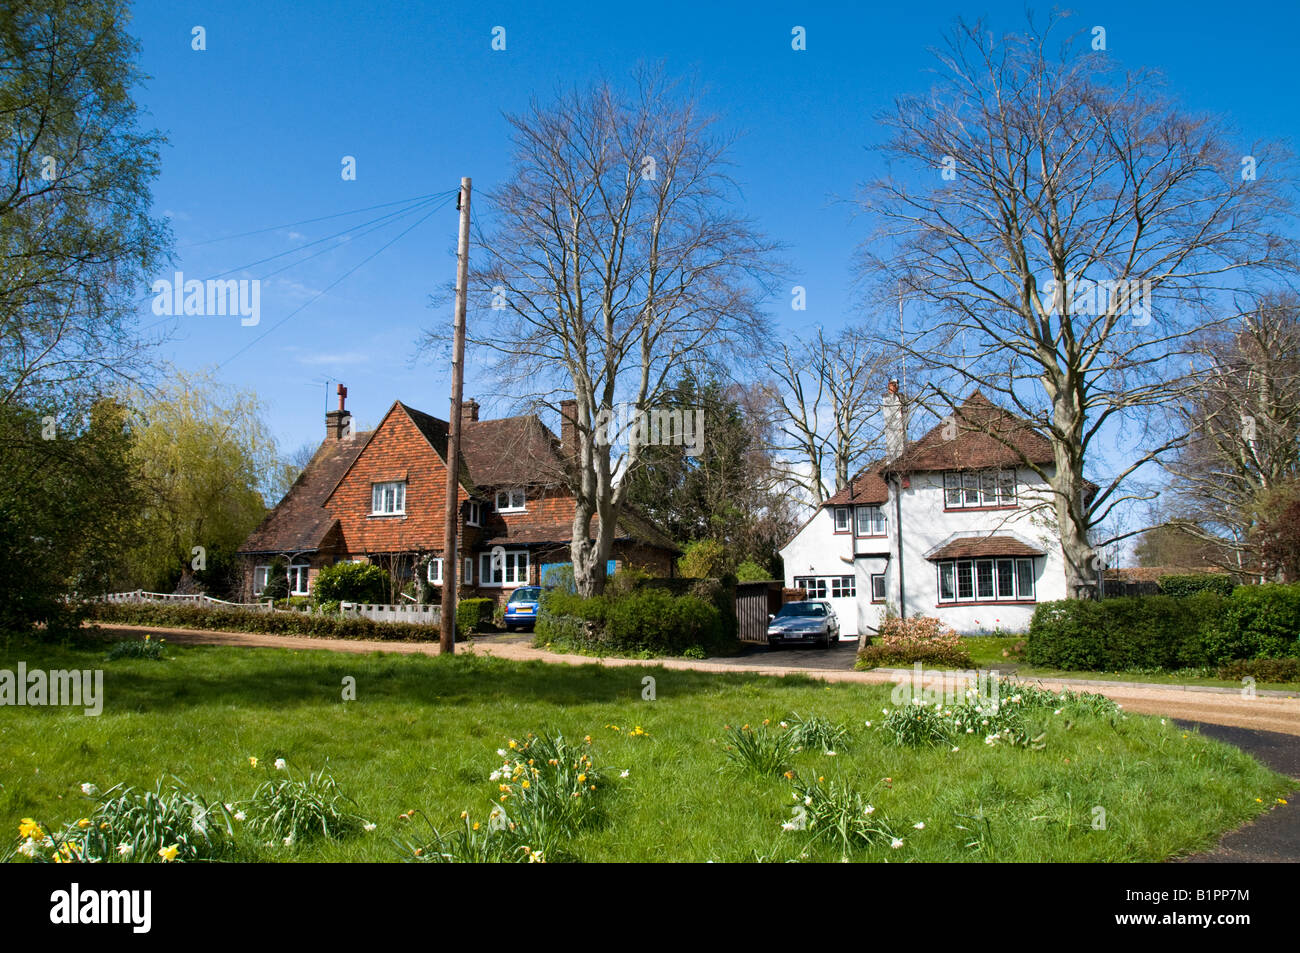 Ditached houses in Dorking, Surrey, England Stock Photo